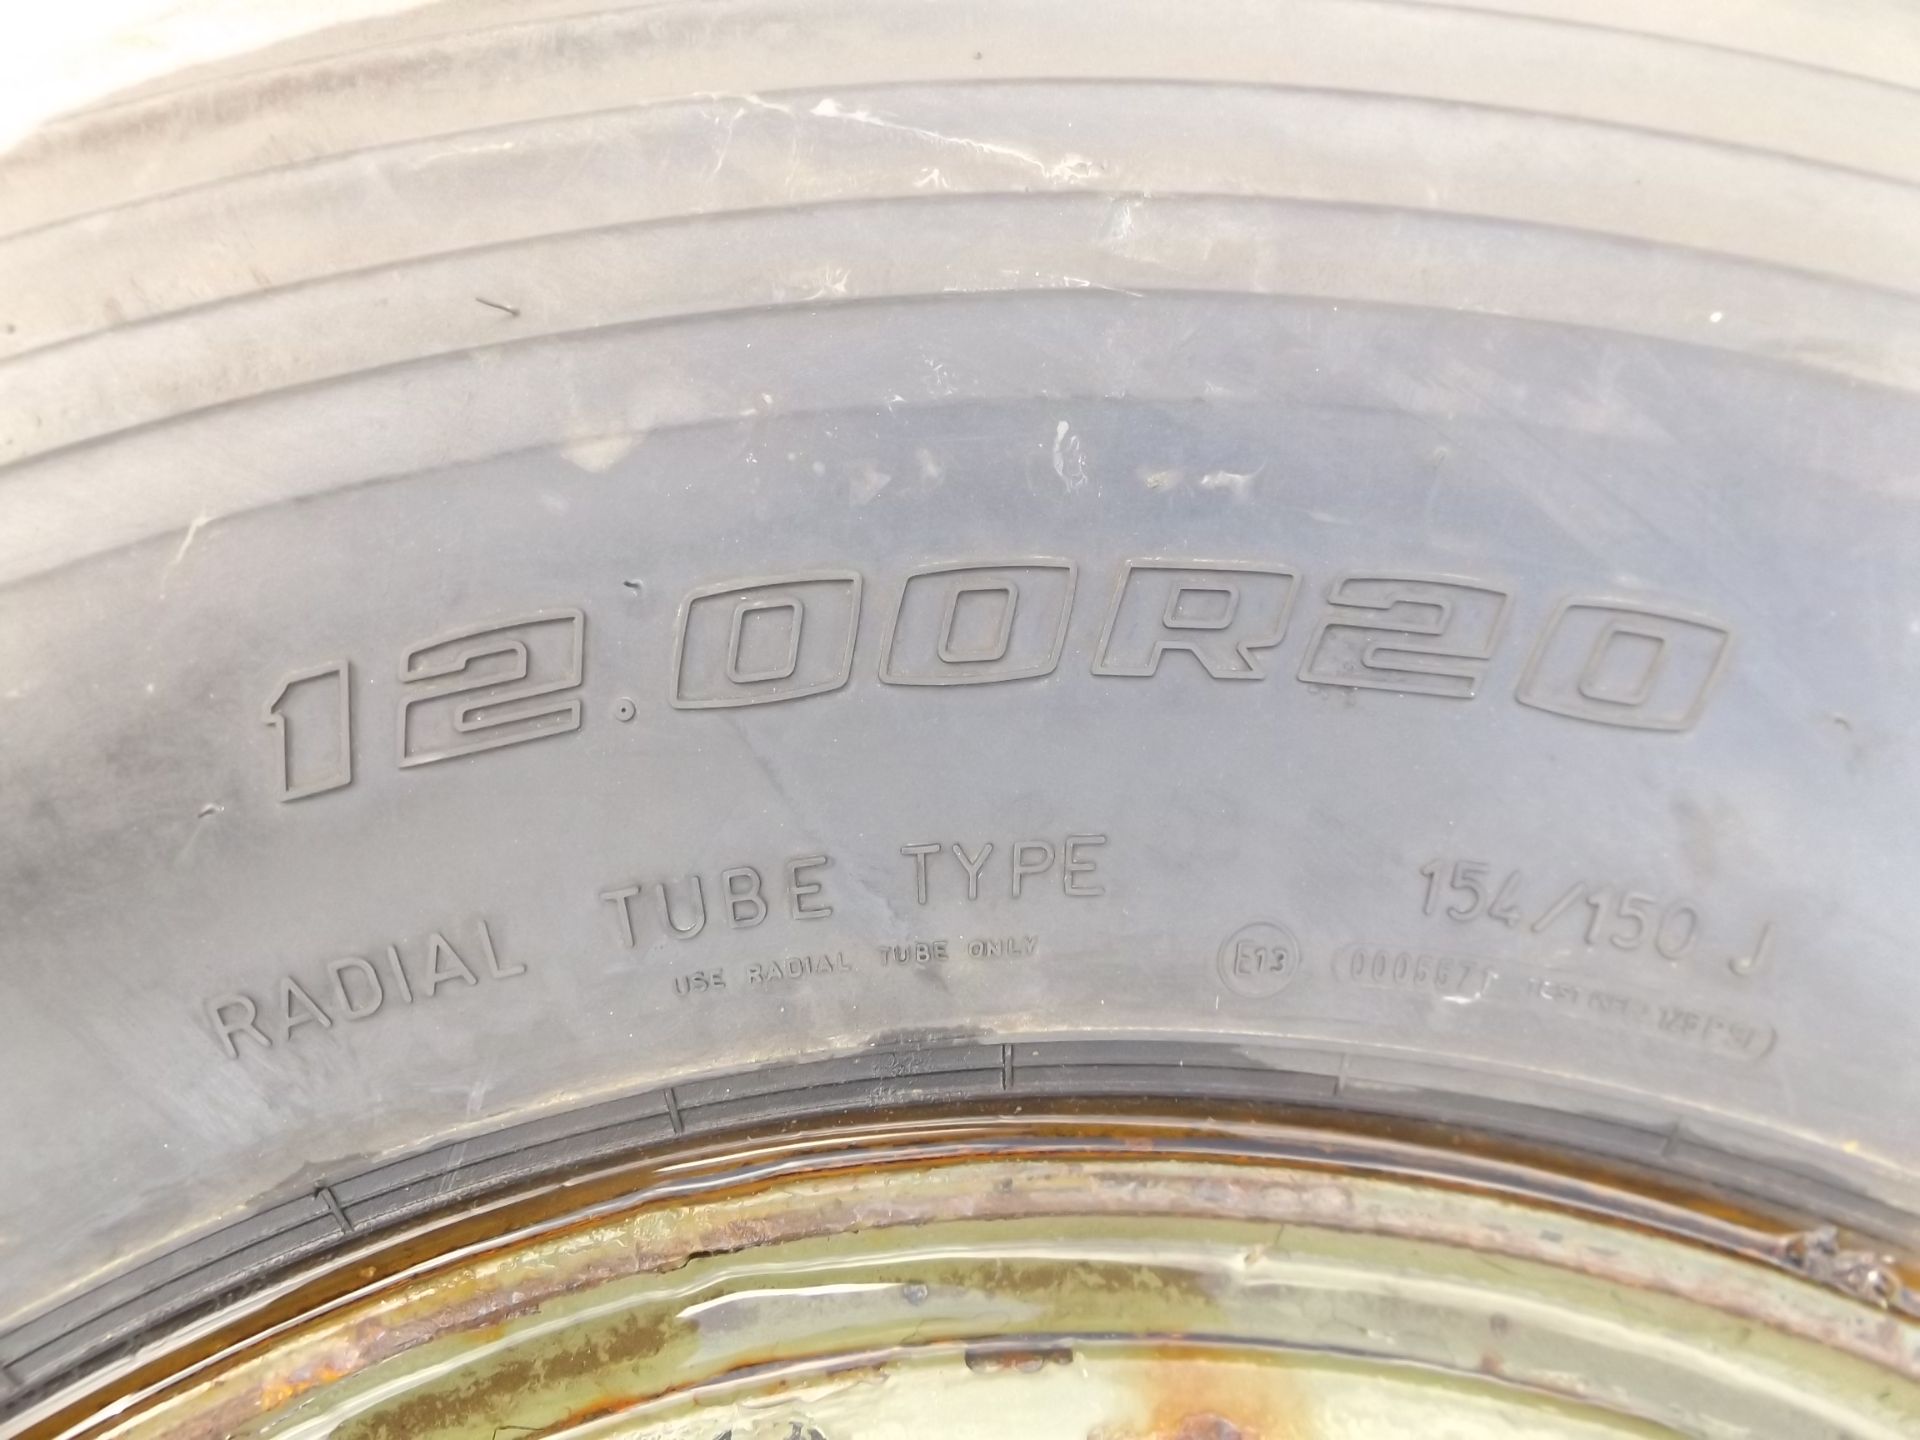 1 x Goodyear G388 12.00 R20 Tyre complete with 10 stud rim - Image 5 of 7